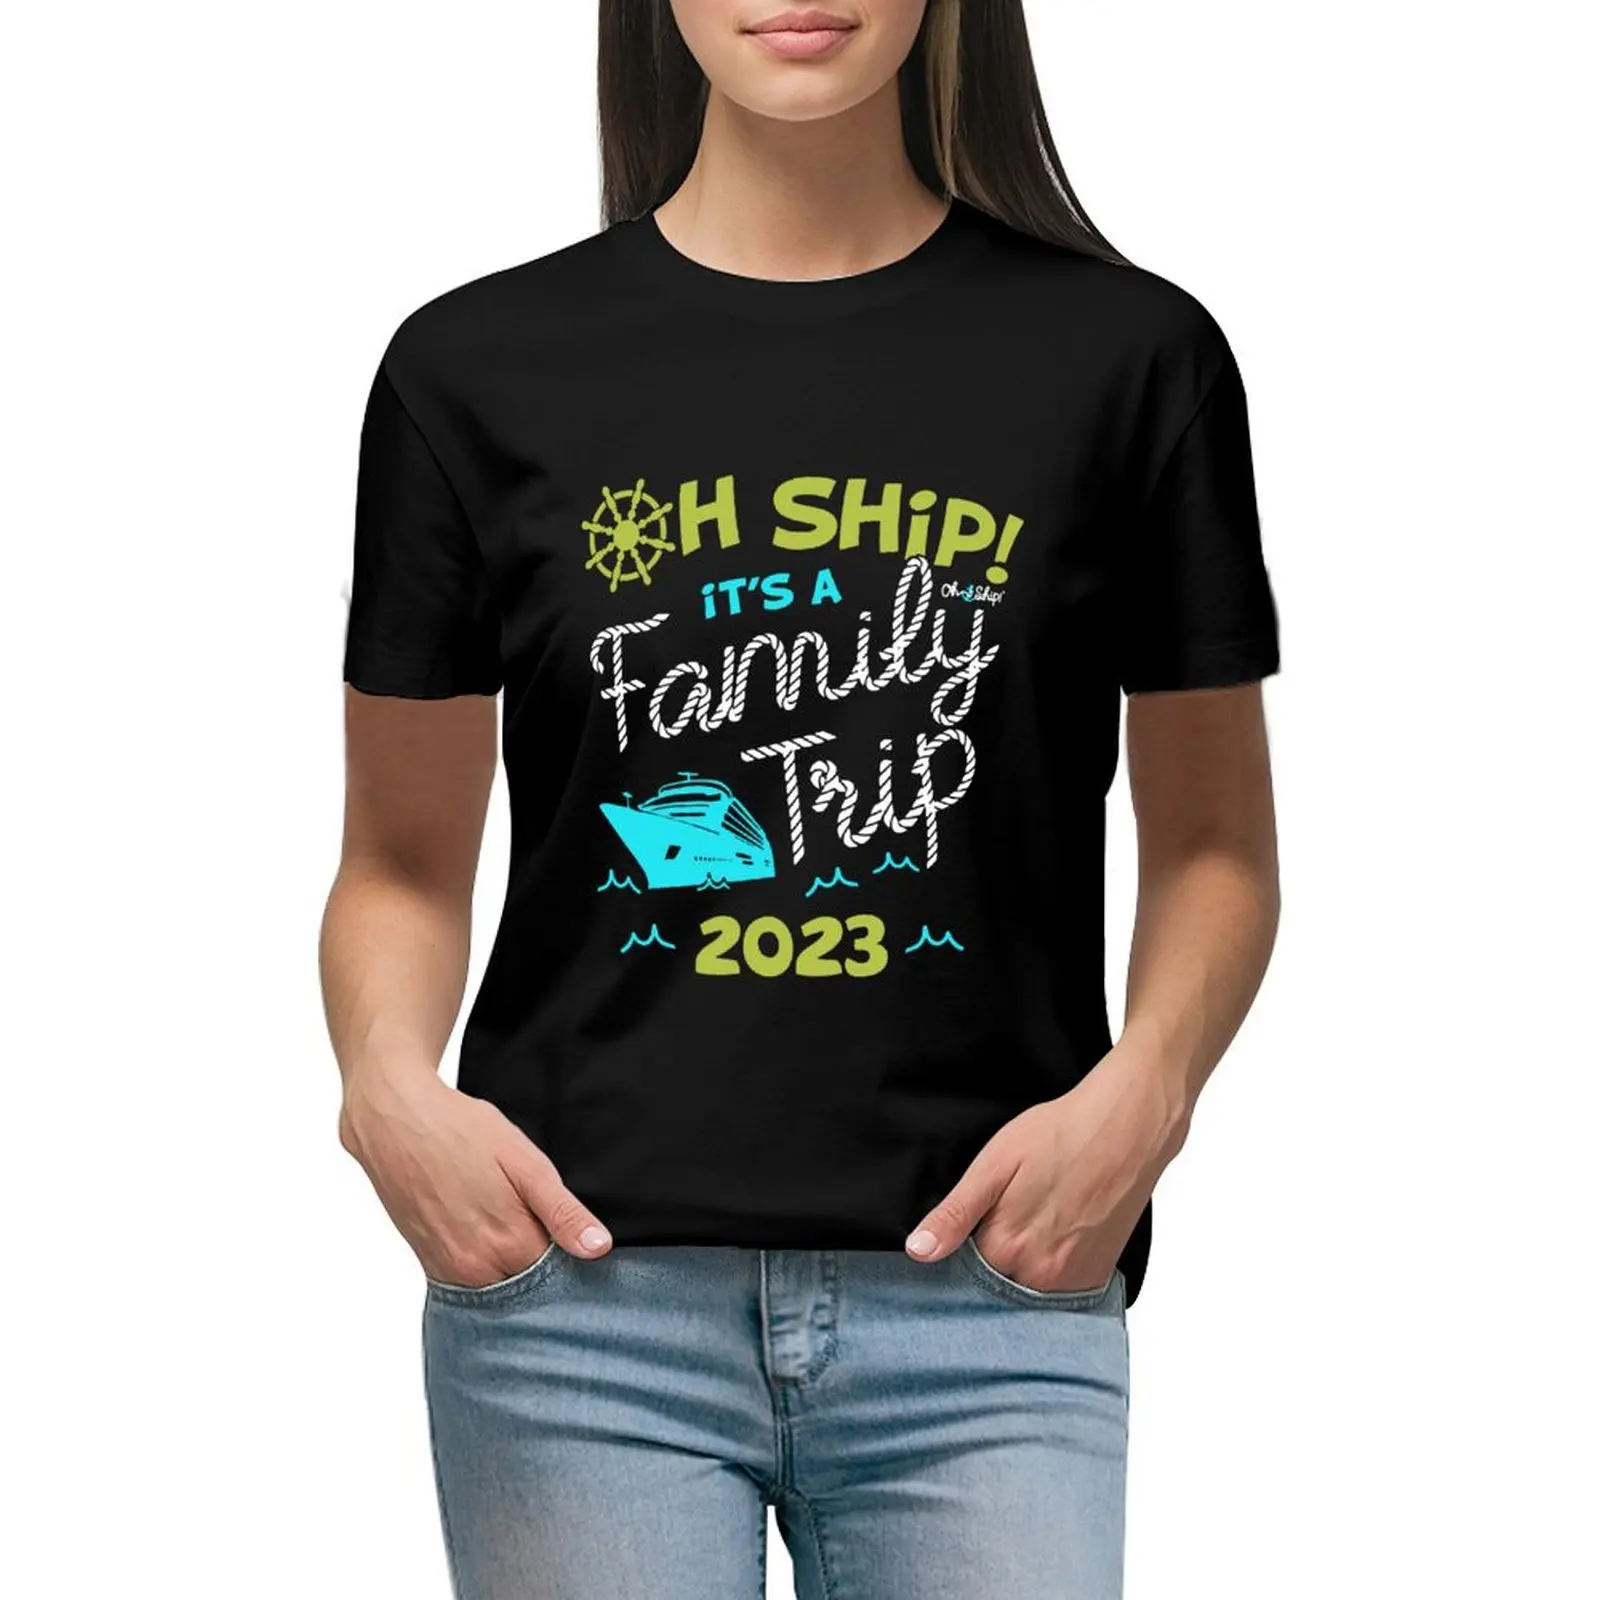 

Oh Ship It's a Family Trip 2023 - Oh Ship 2023 Cruise T-shirt shirts graphic tees Short sleeve tee funny t shirts for Women